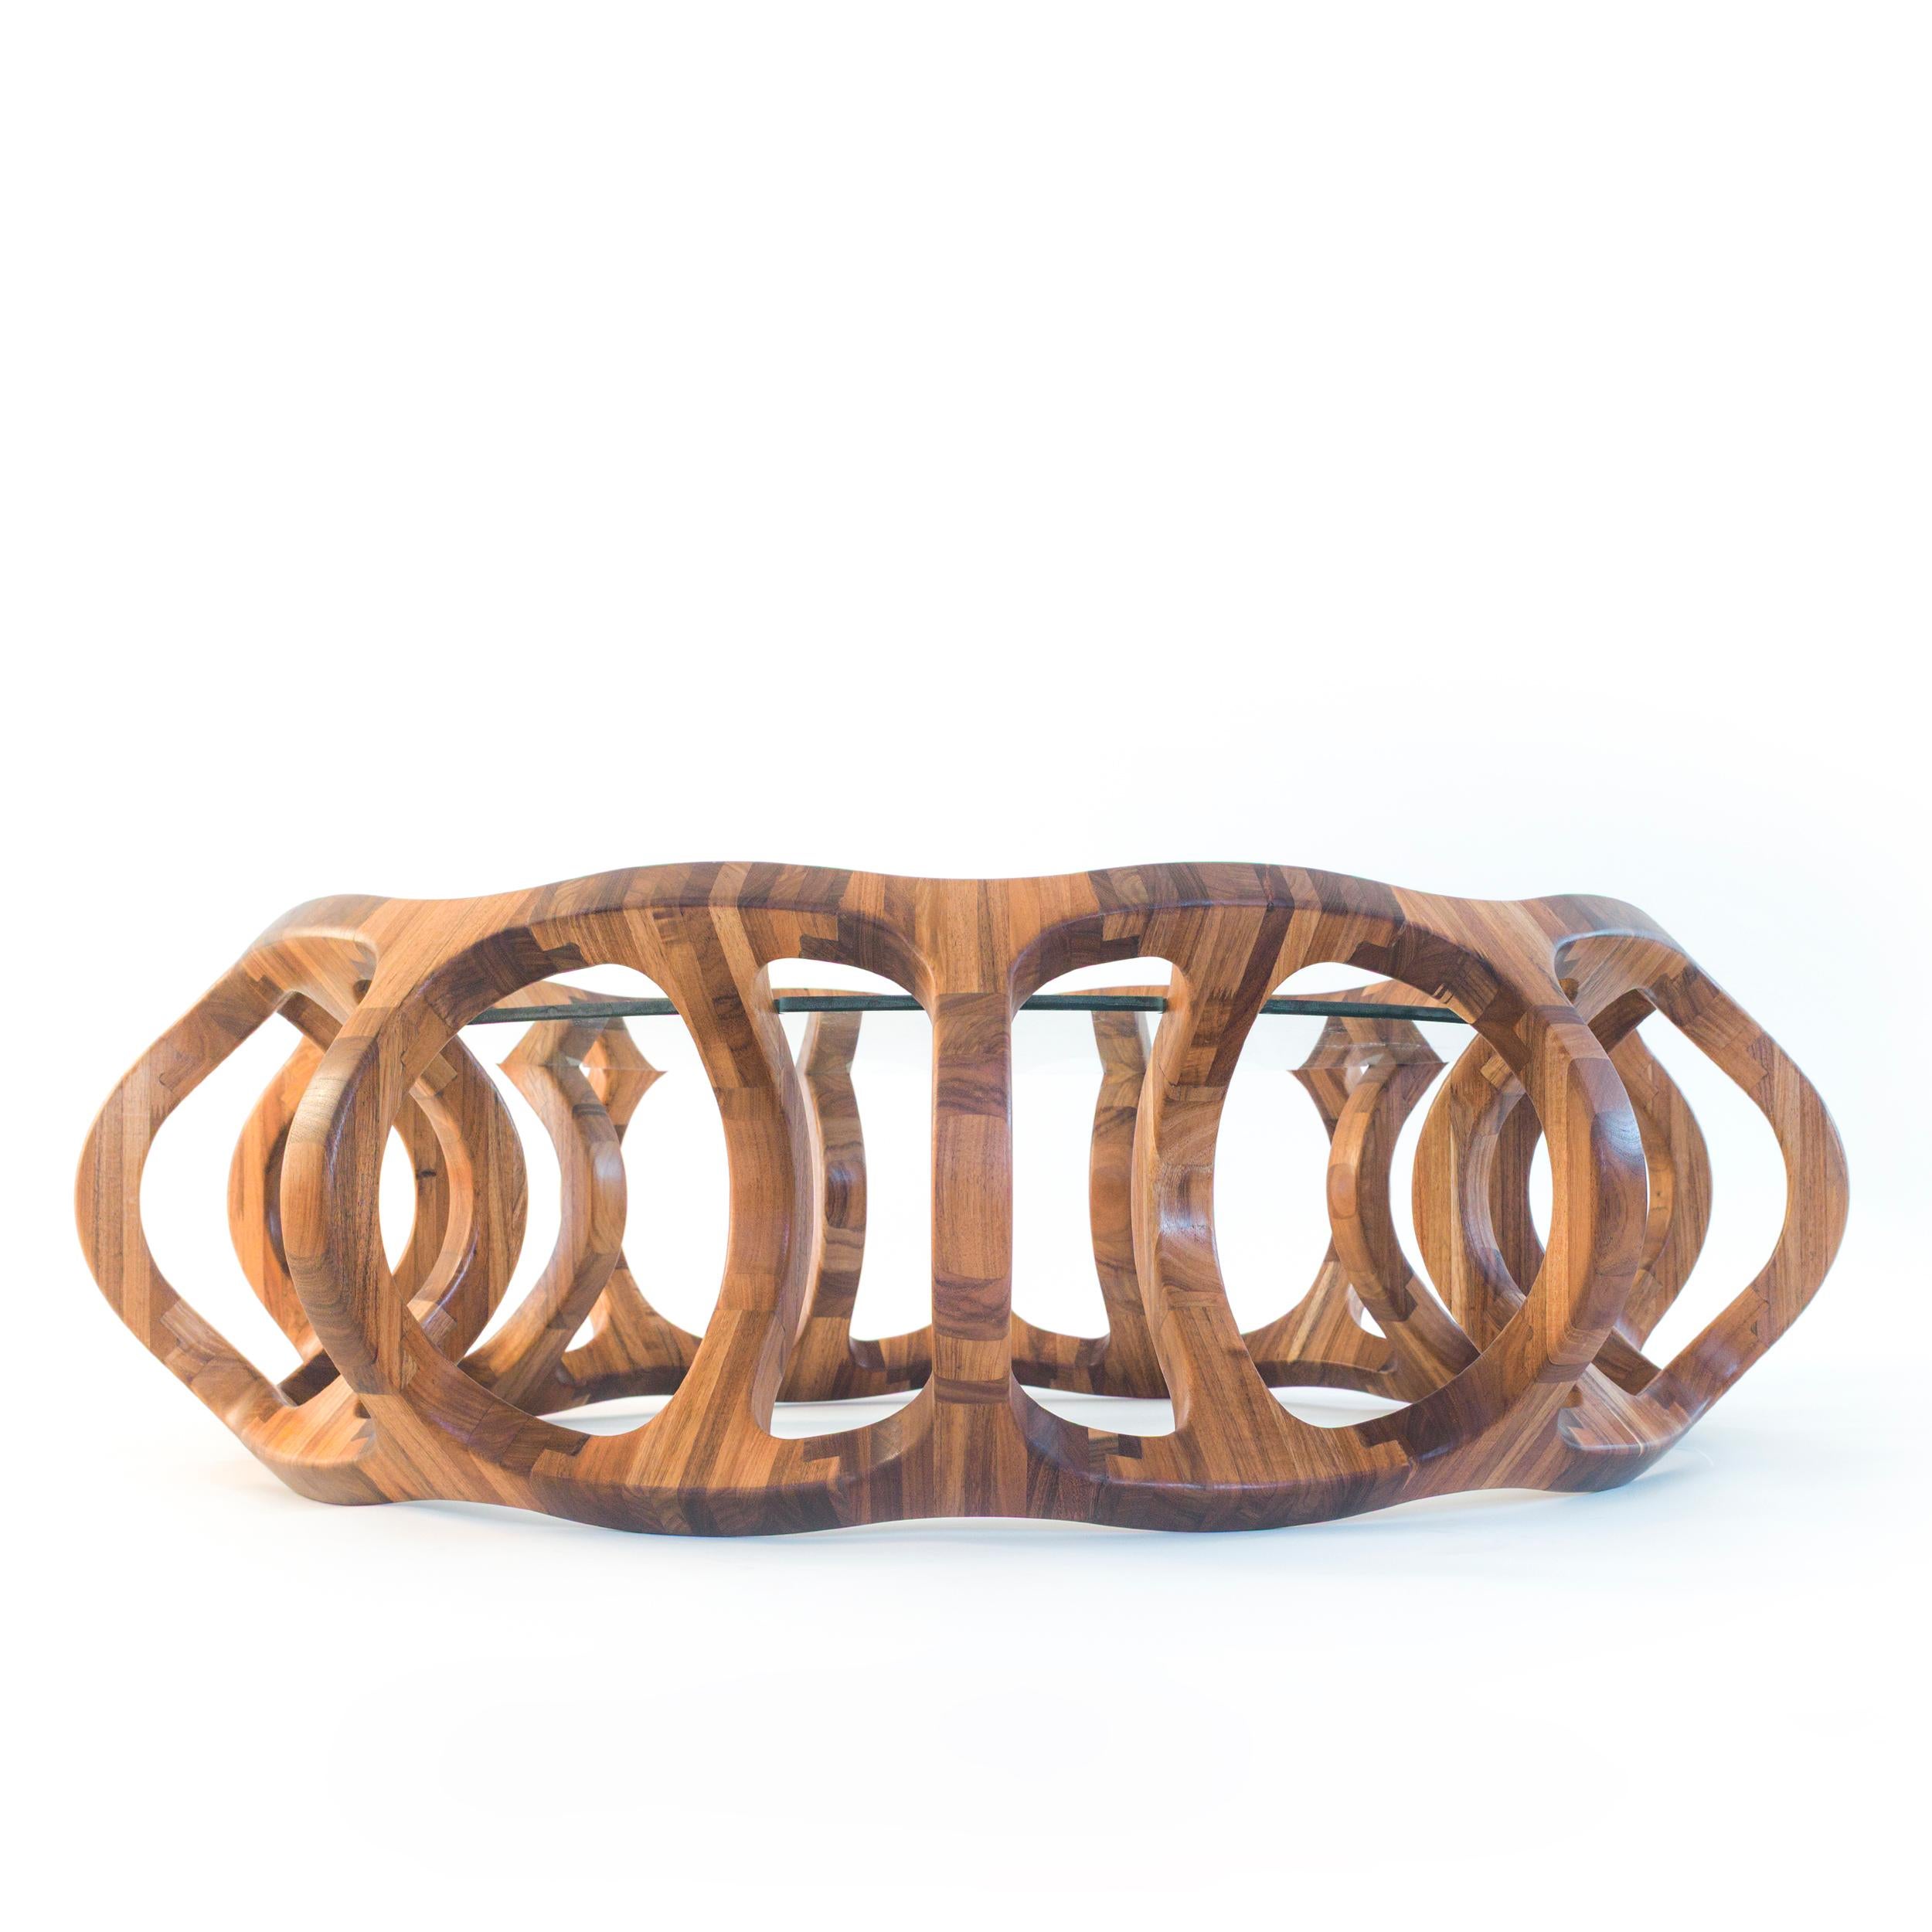 Mexican Toro G10, Geometric Sculptural Center Table Made of Solid Wood by Pedro Cerisola For Sale